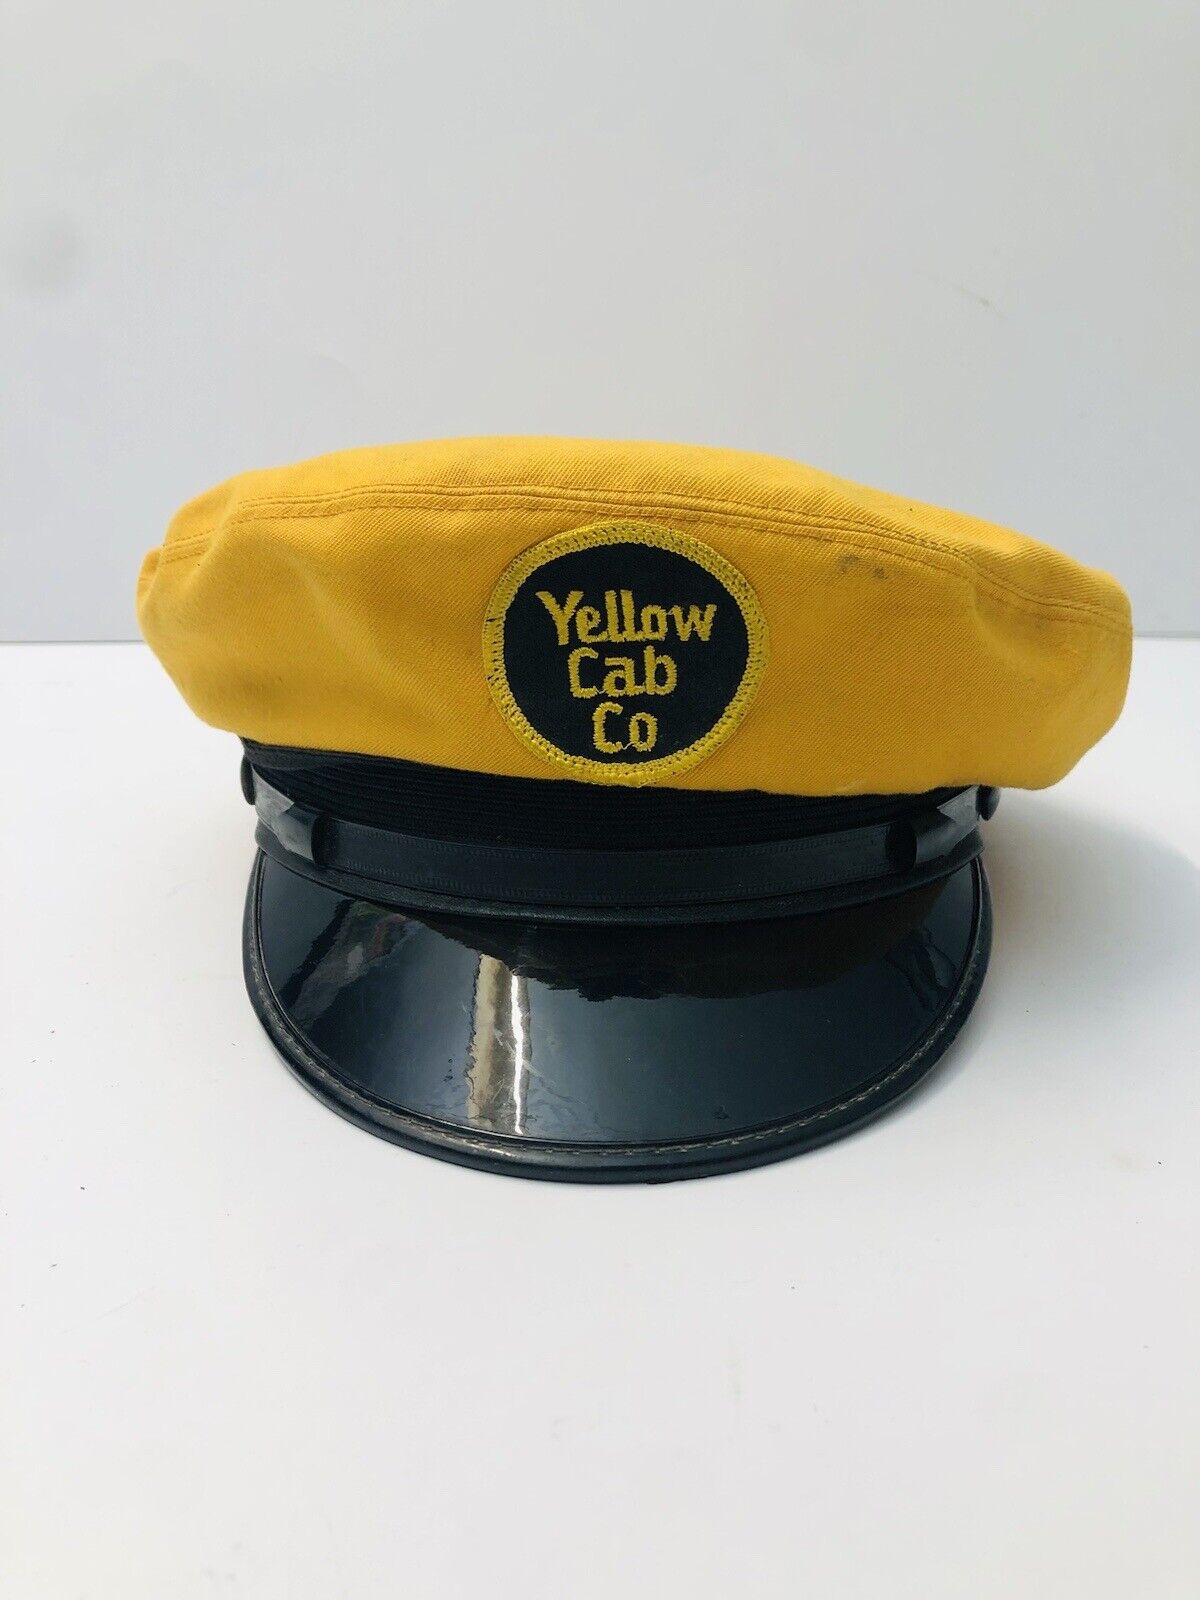 Vintage 1940’s 1950’s Original Yellow Cab Taxi Driver Hat with Embroidered Patch